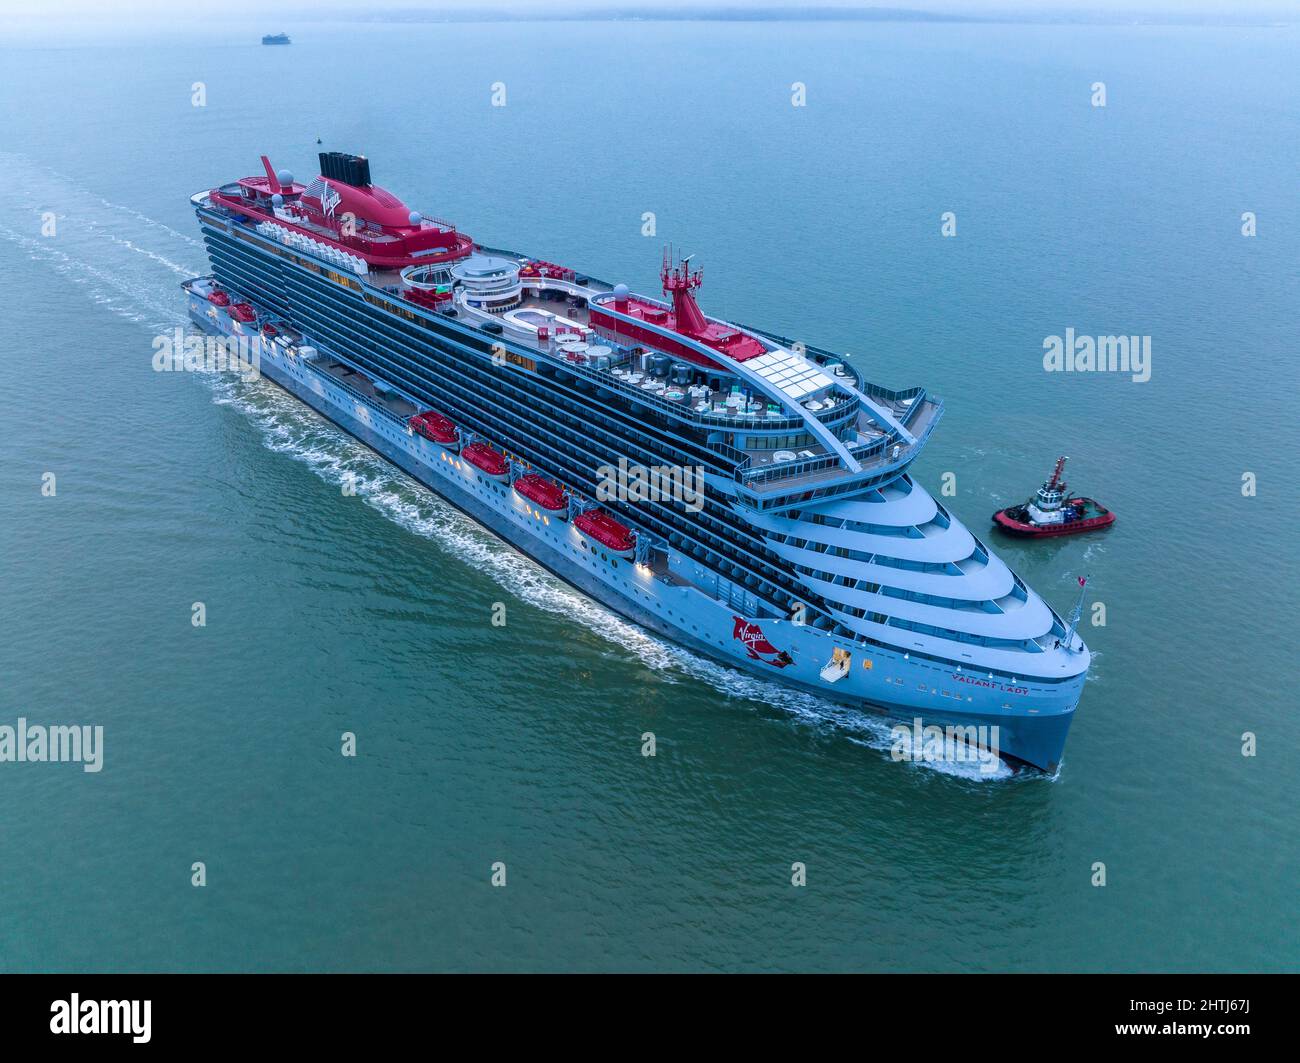 Valiant lady cruise ship by Virgin Voyages arriving at Portsmouth International Port England, early morning Stock Photo